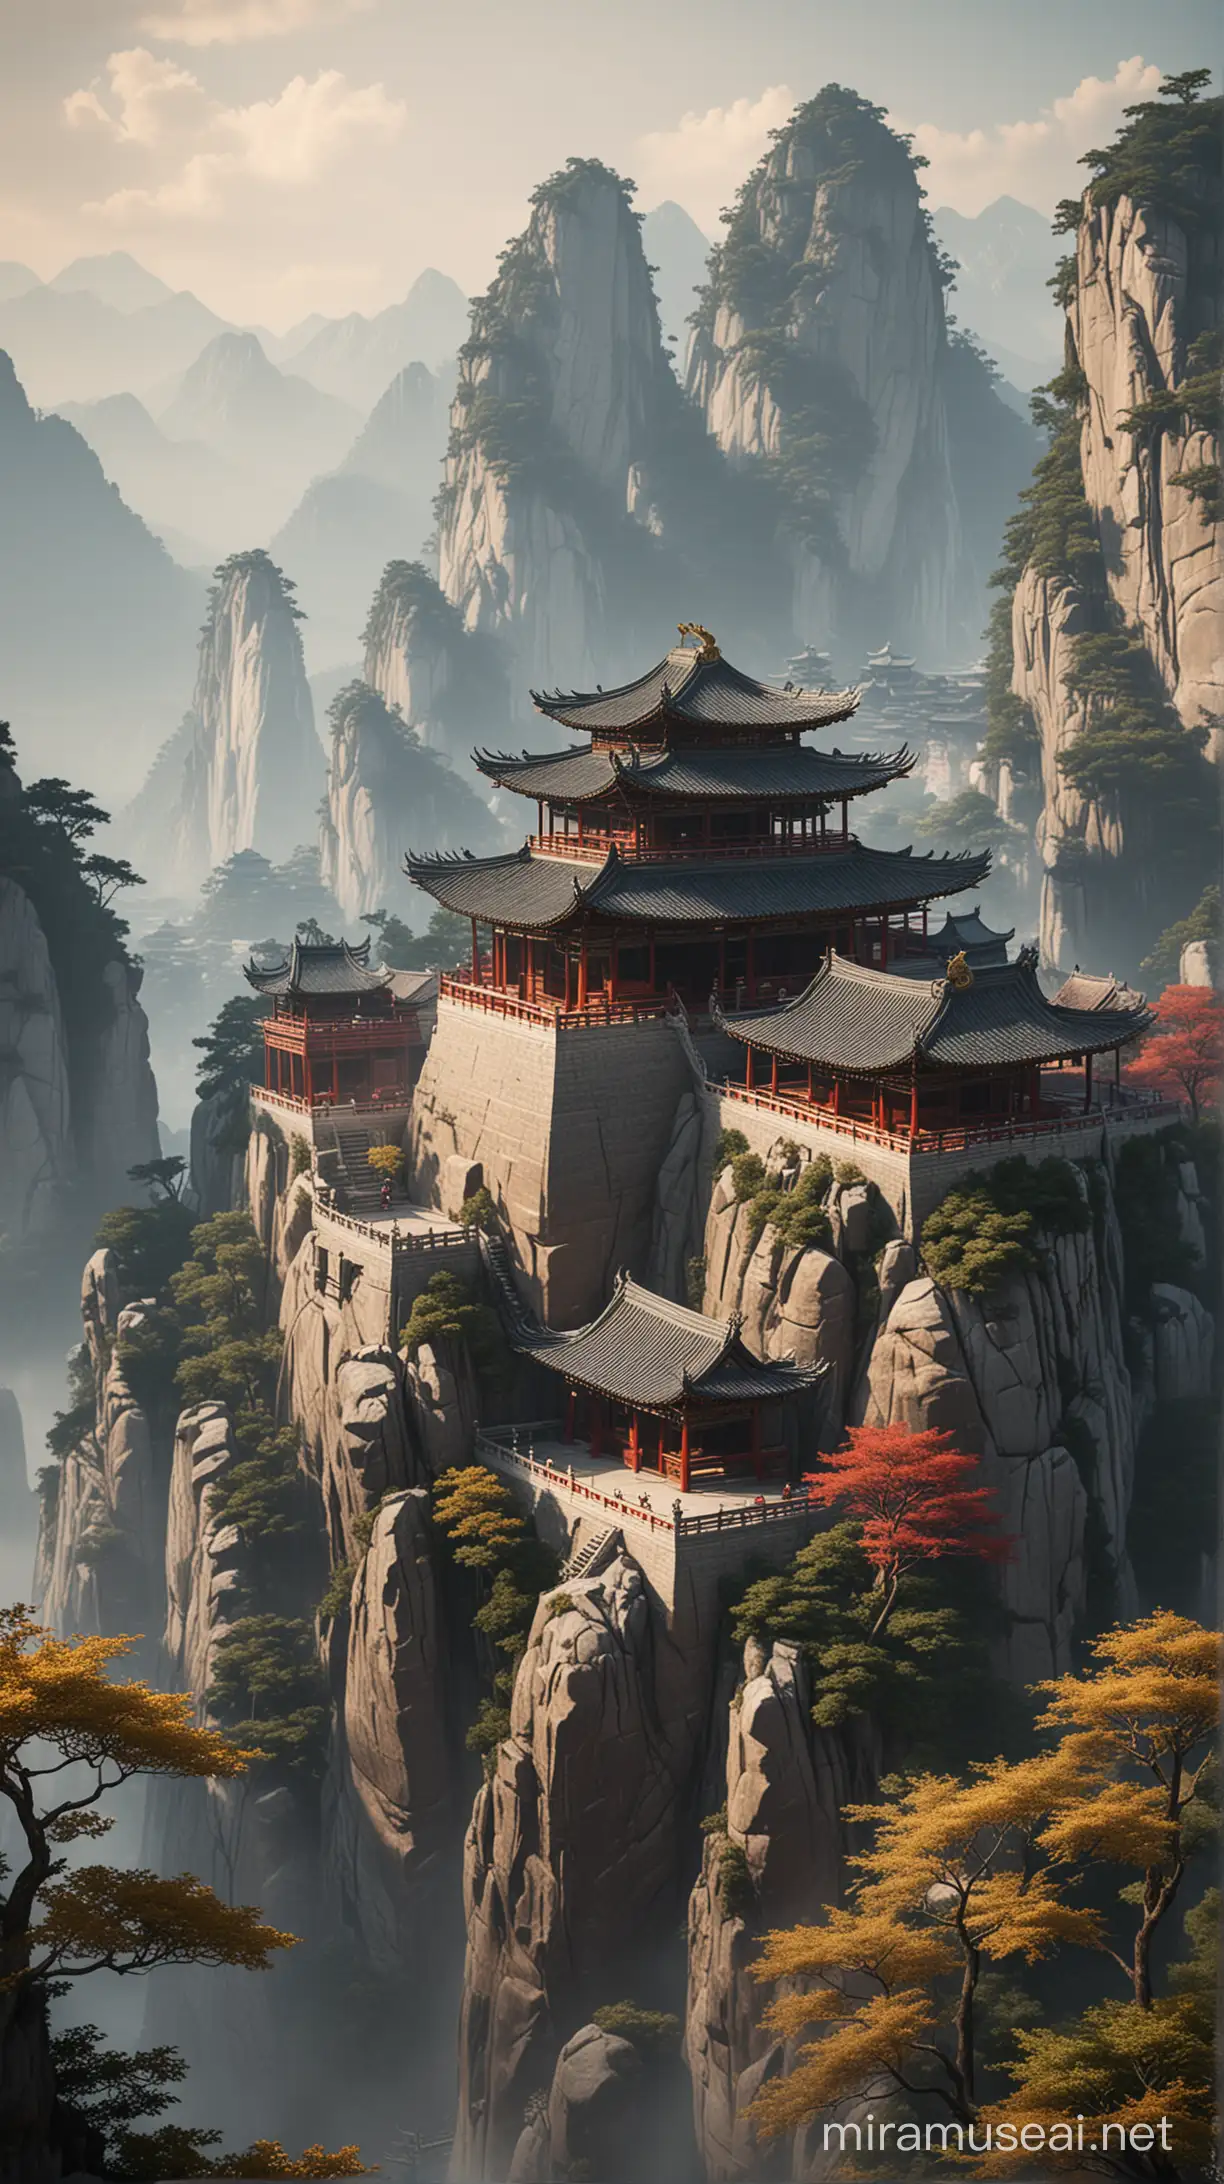 Serene Chinese Temple Overlooking Majestic Mountains